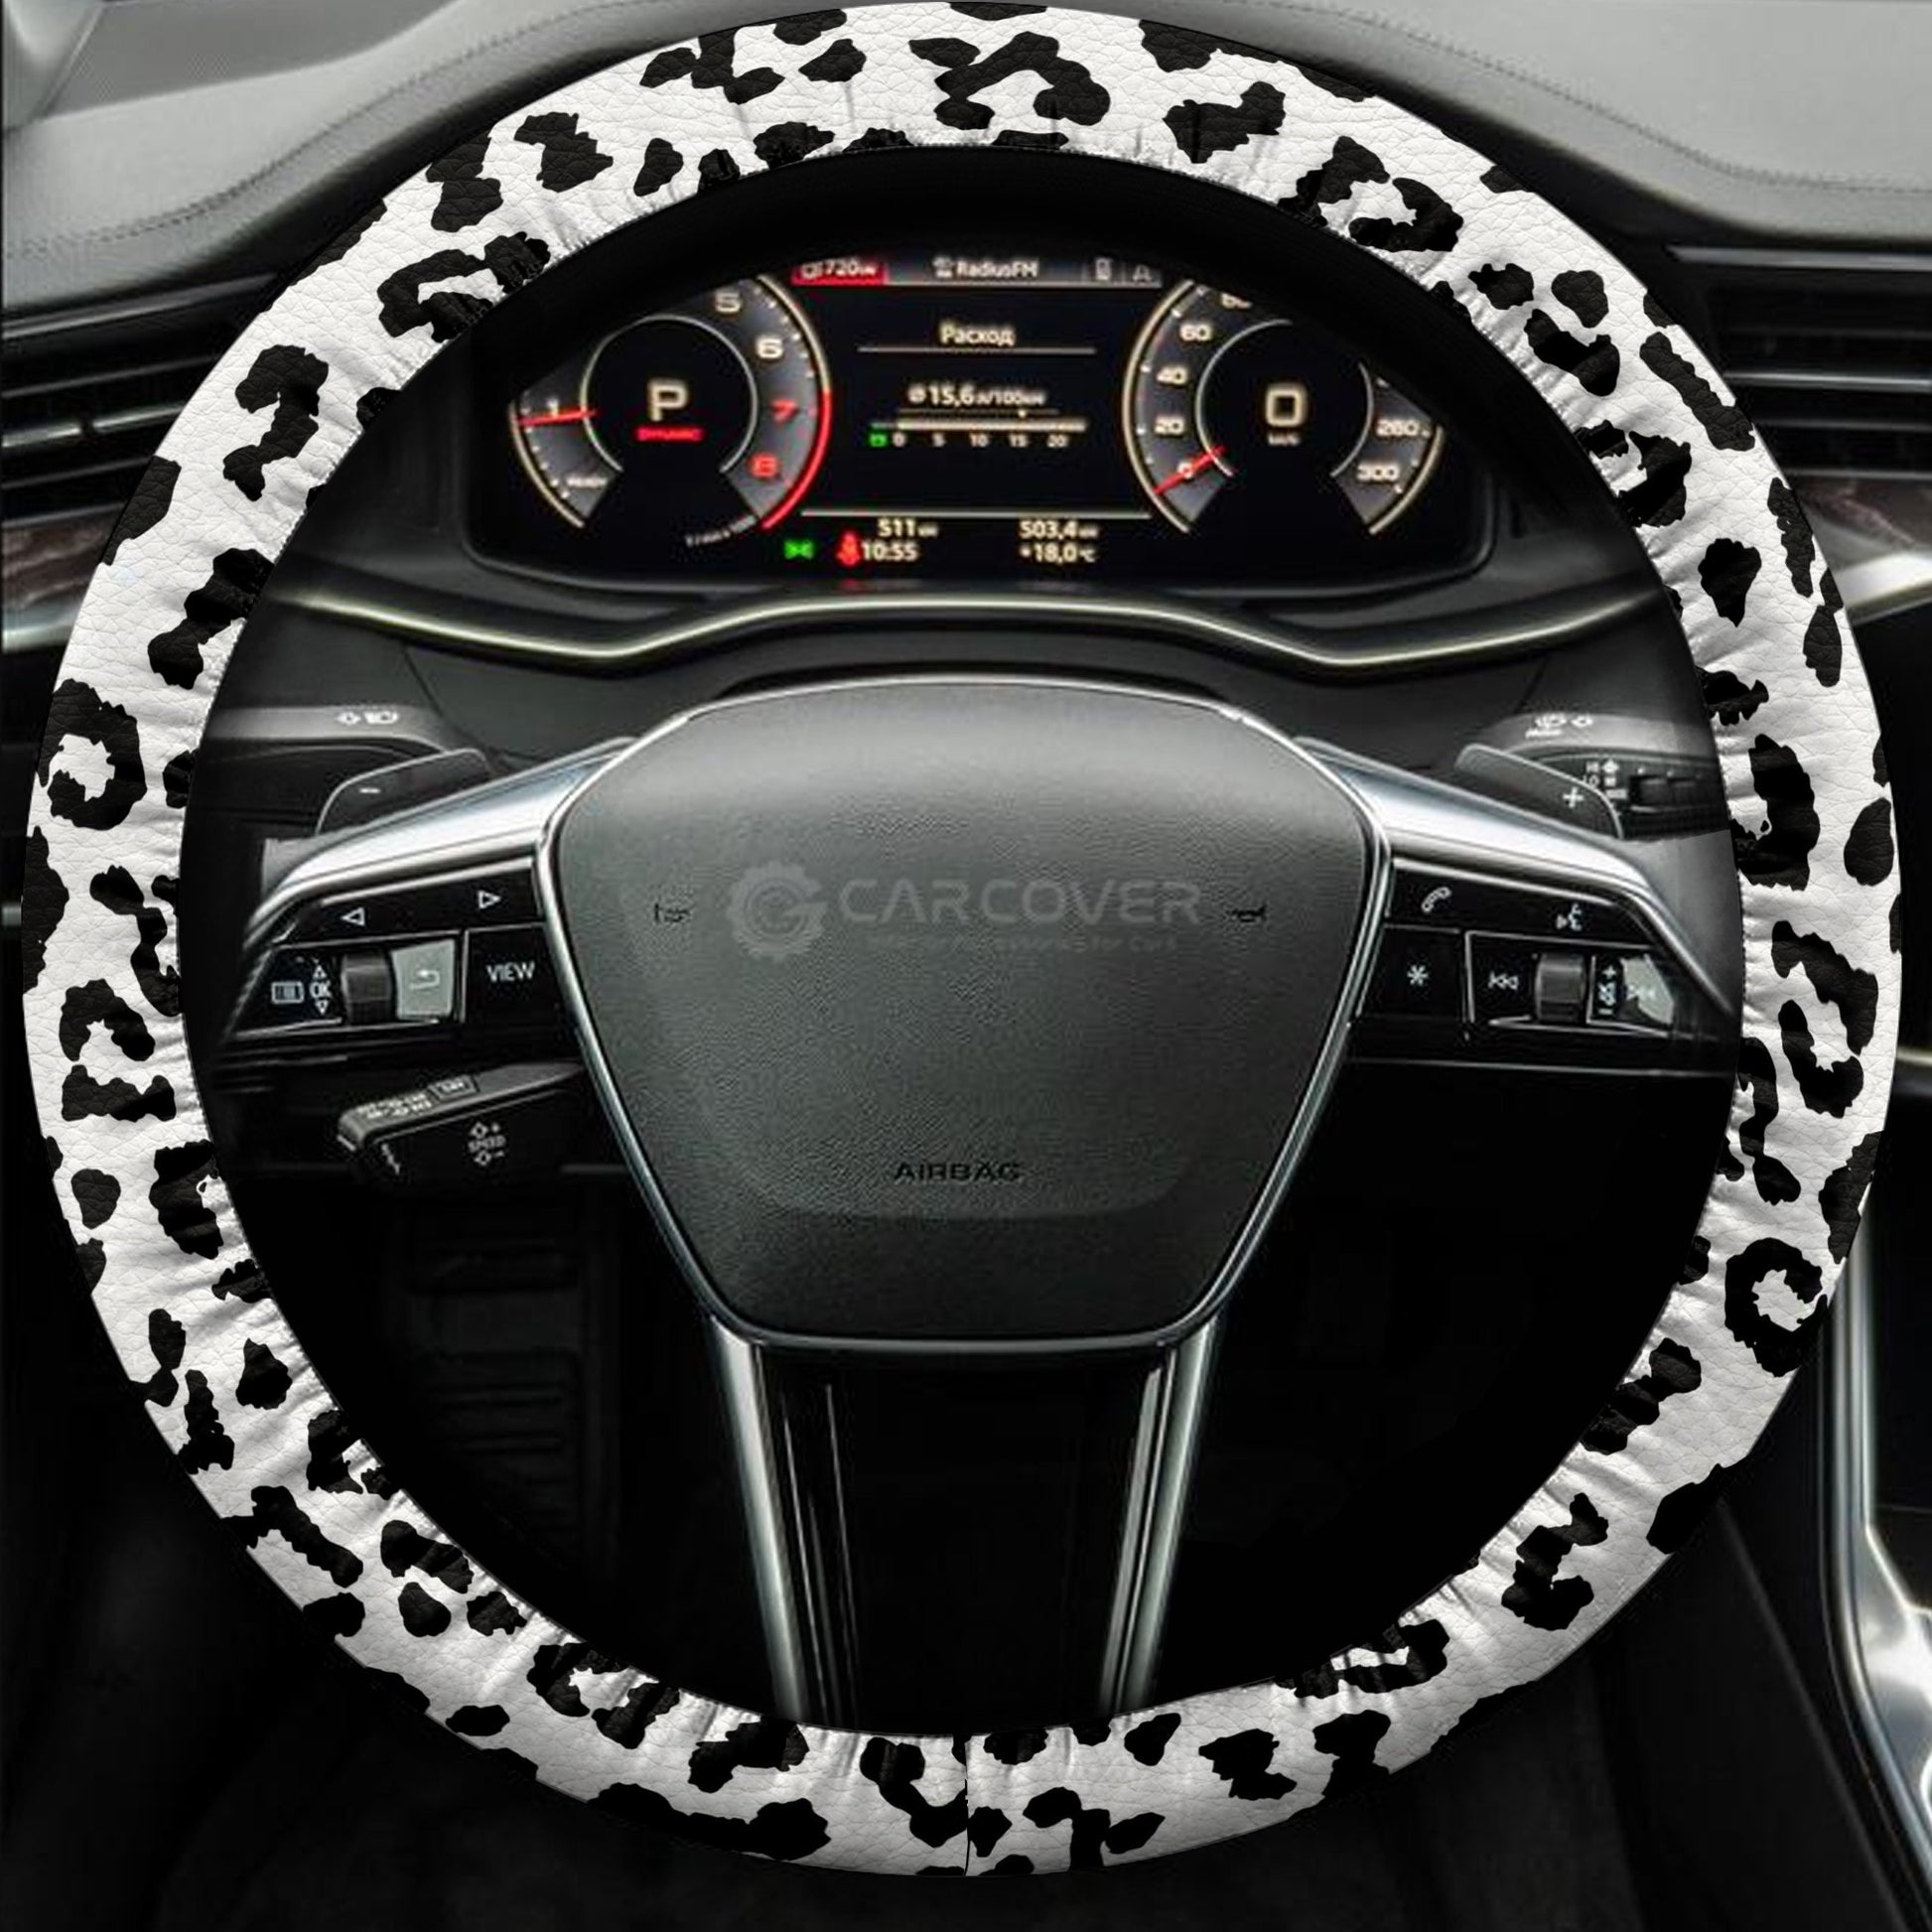 Leopard Steering Wheel Cover Custom Animal Skin Printed Car Interior Accessories - Gearcarcover - 4